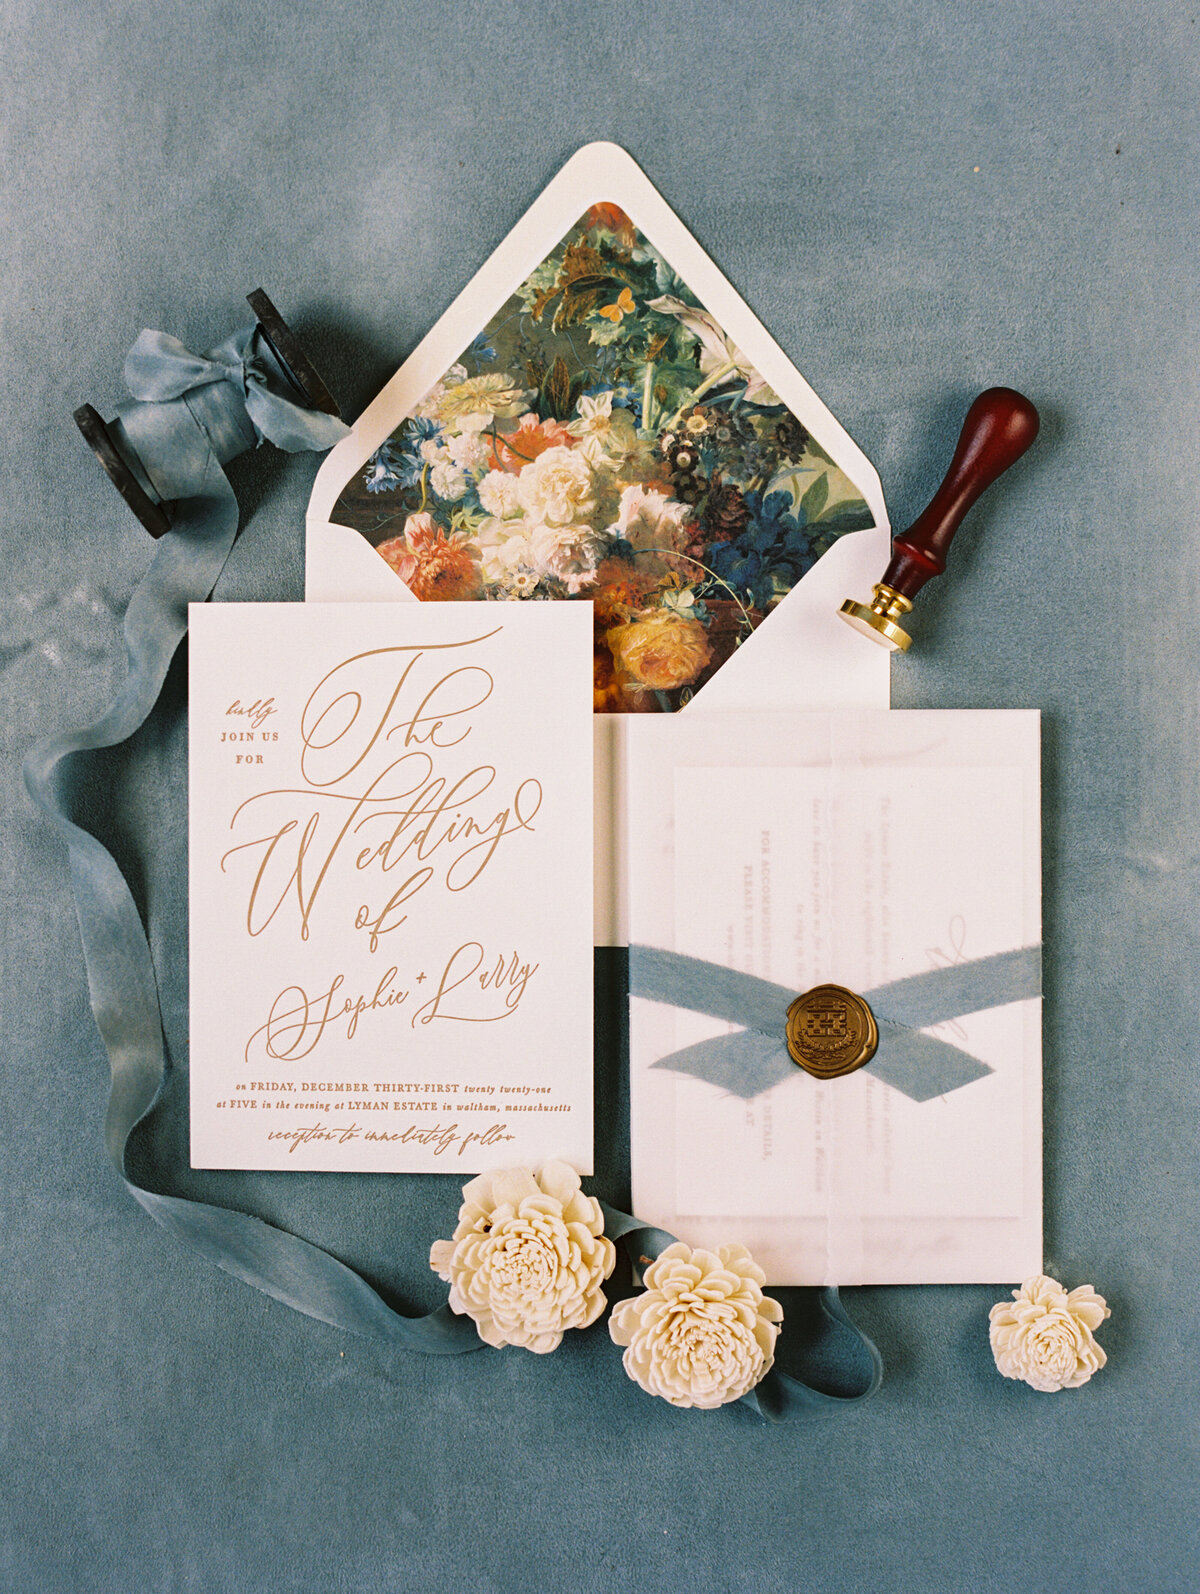 wedding invitation suite for New Years Eve wedding at the Lyman Estate in Waltham Massachusetts.